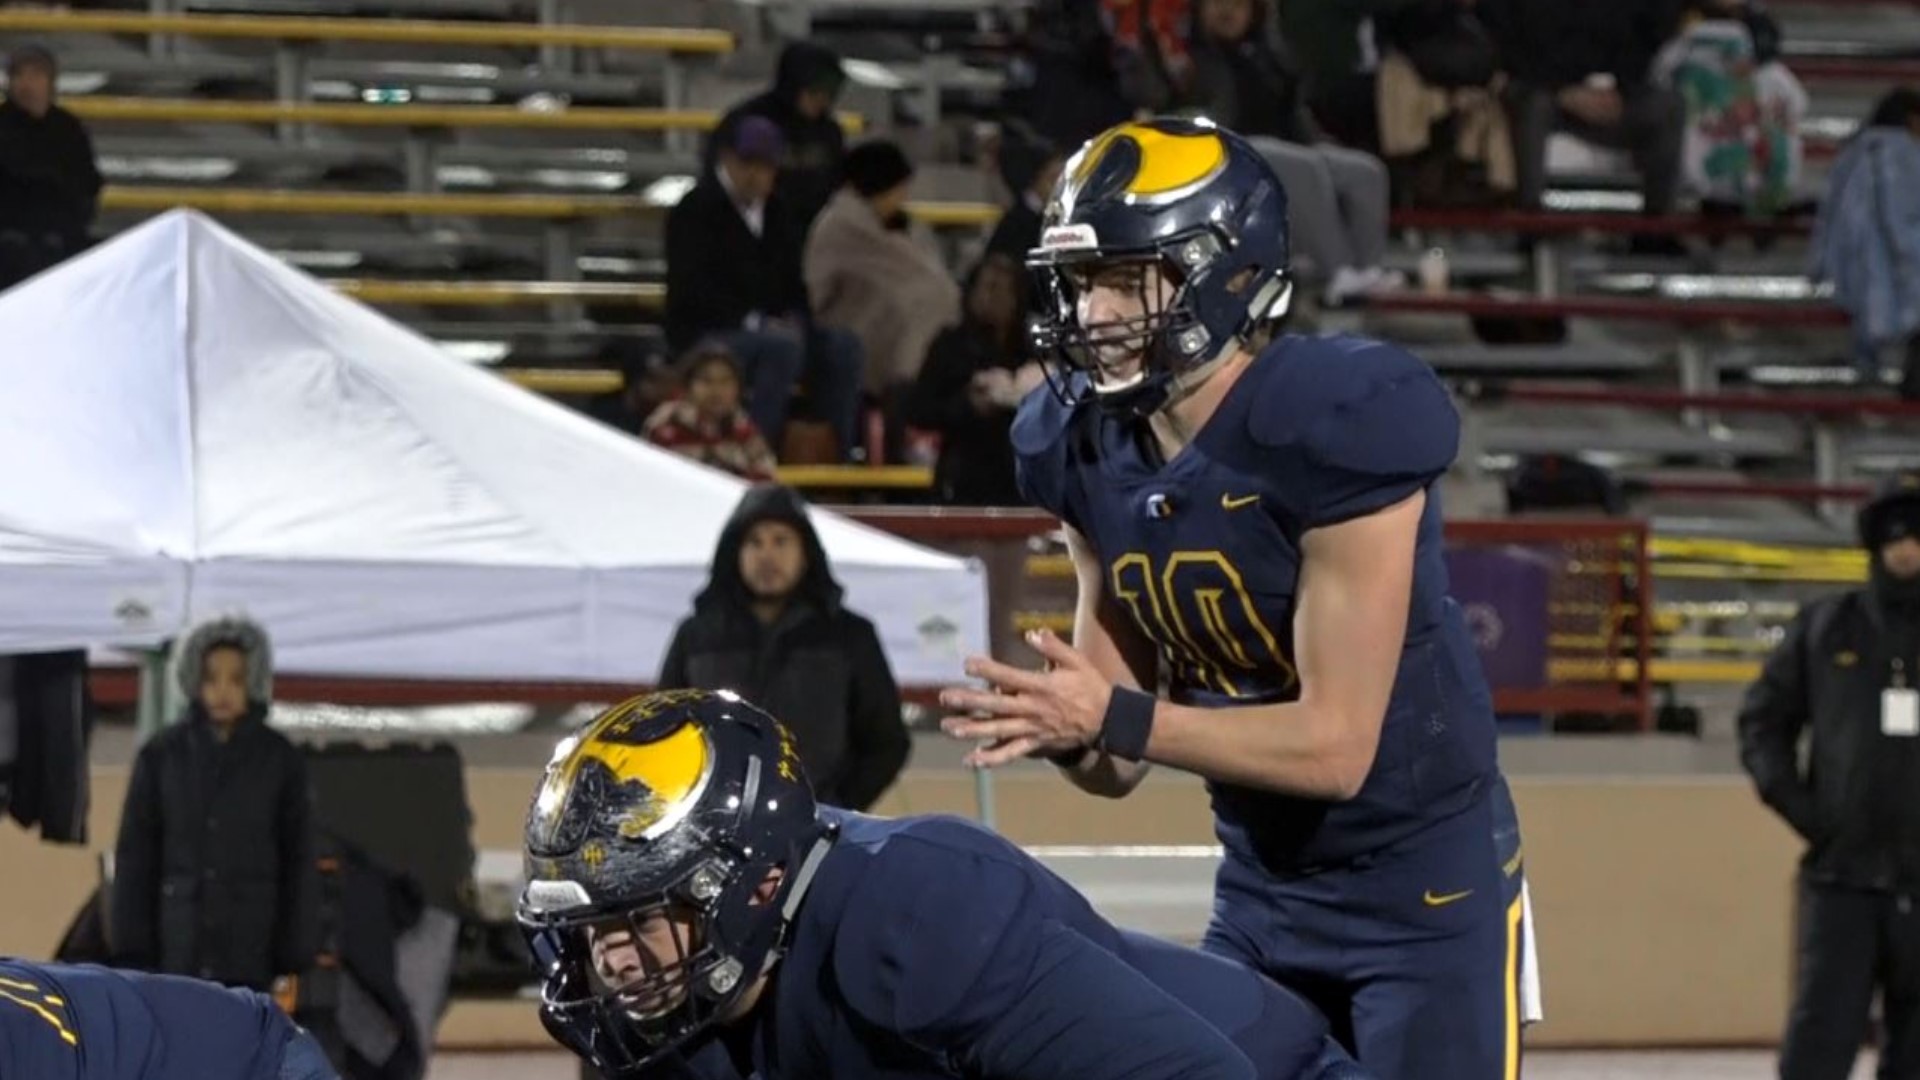 Oak Ridge High School junior quarterback Justin Lamson talks about his decision to commit to play college at Syracuse & his hopes to play his senior season.